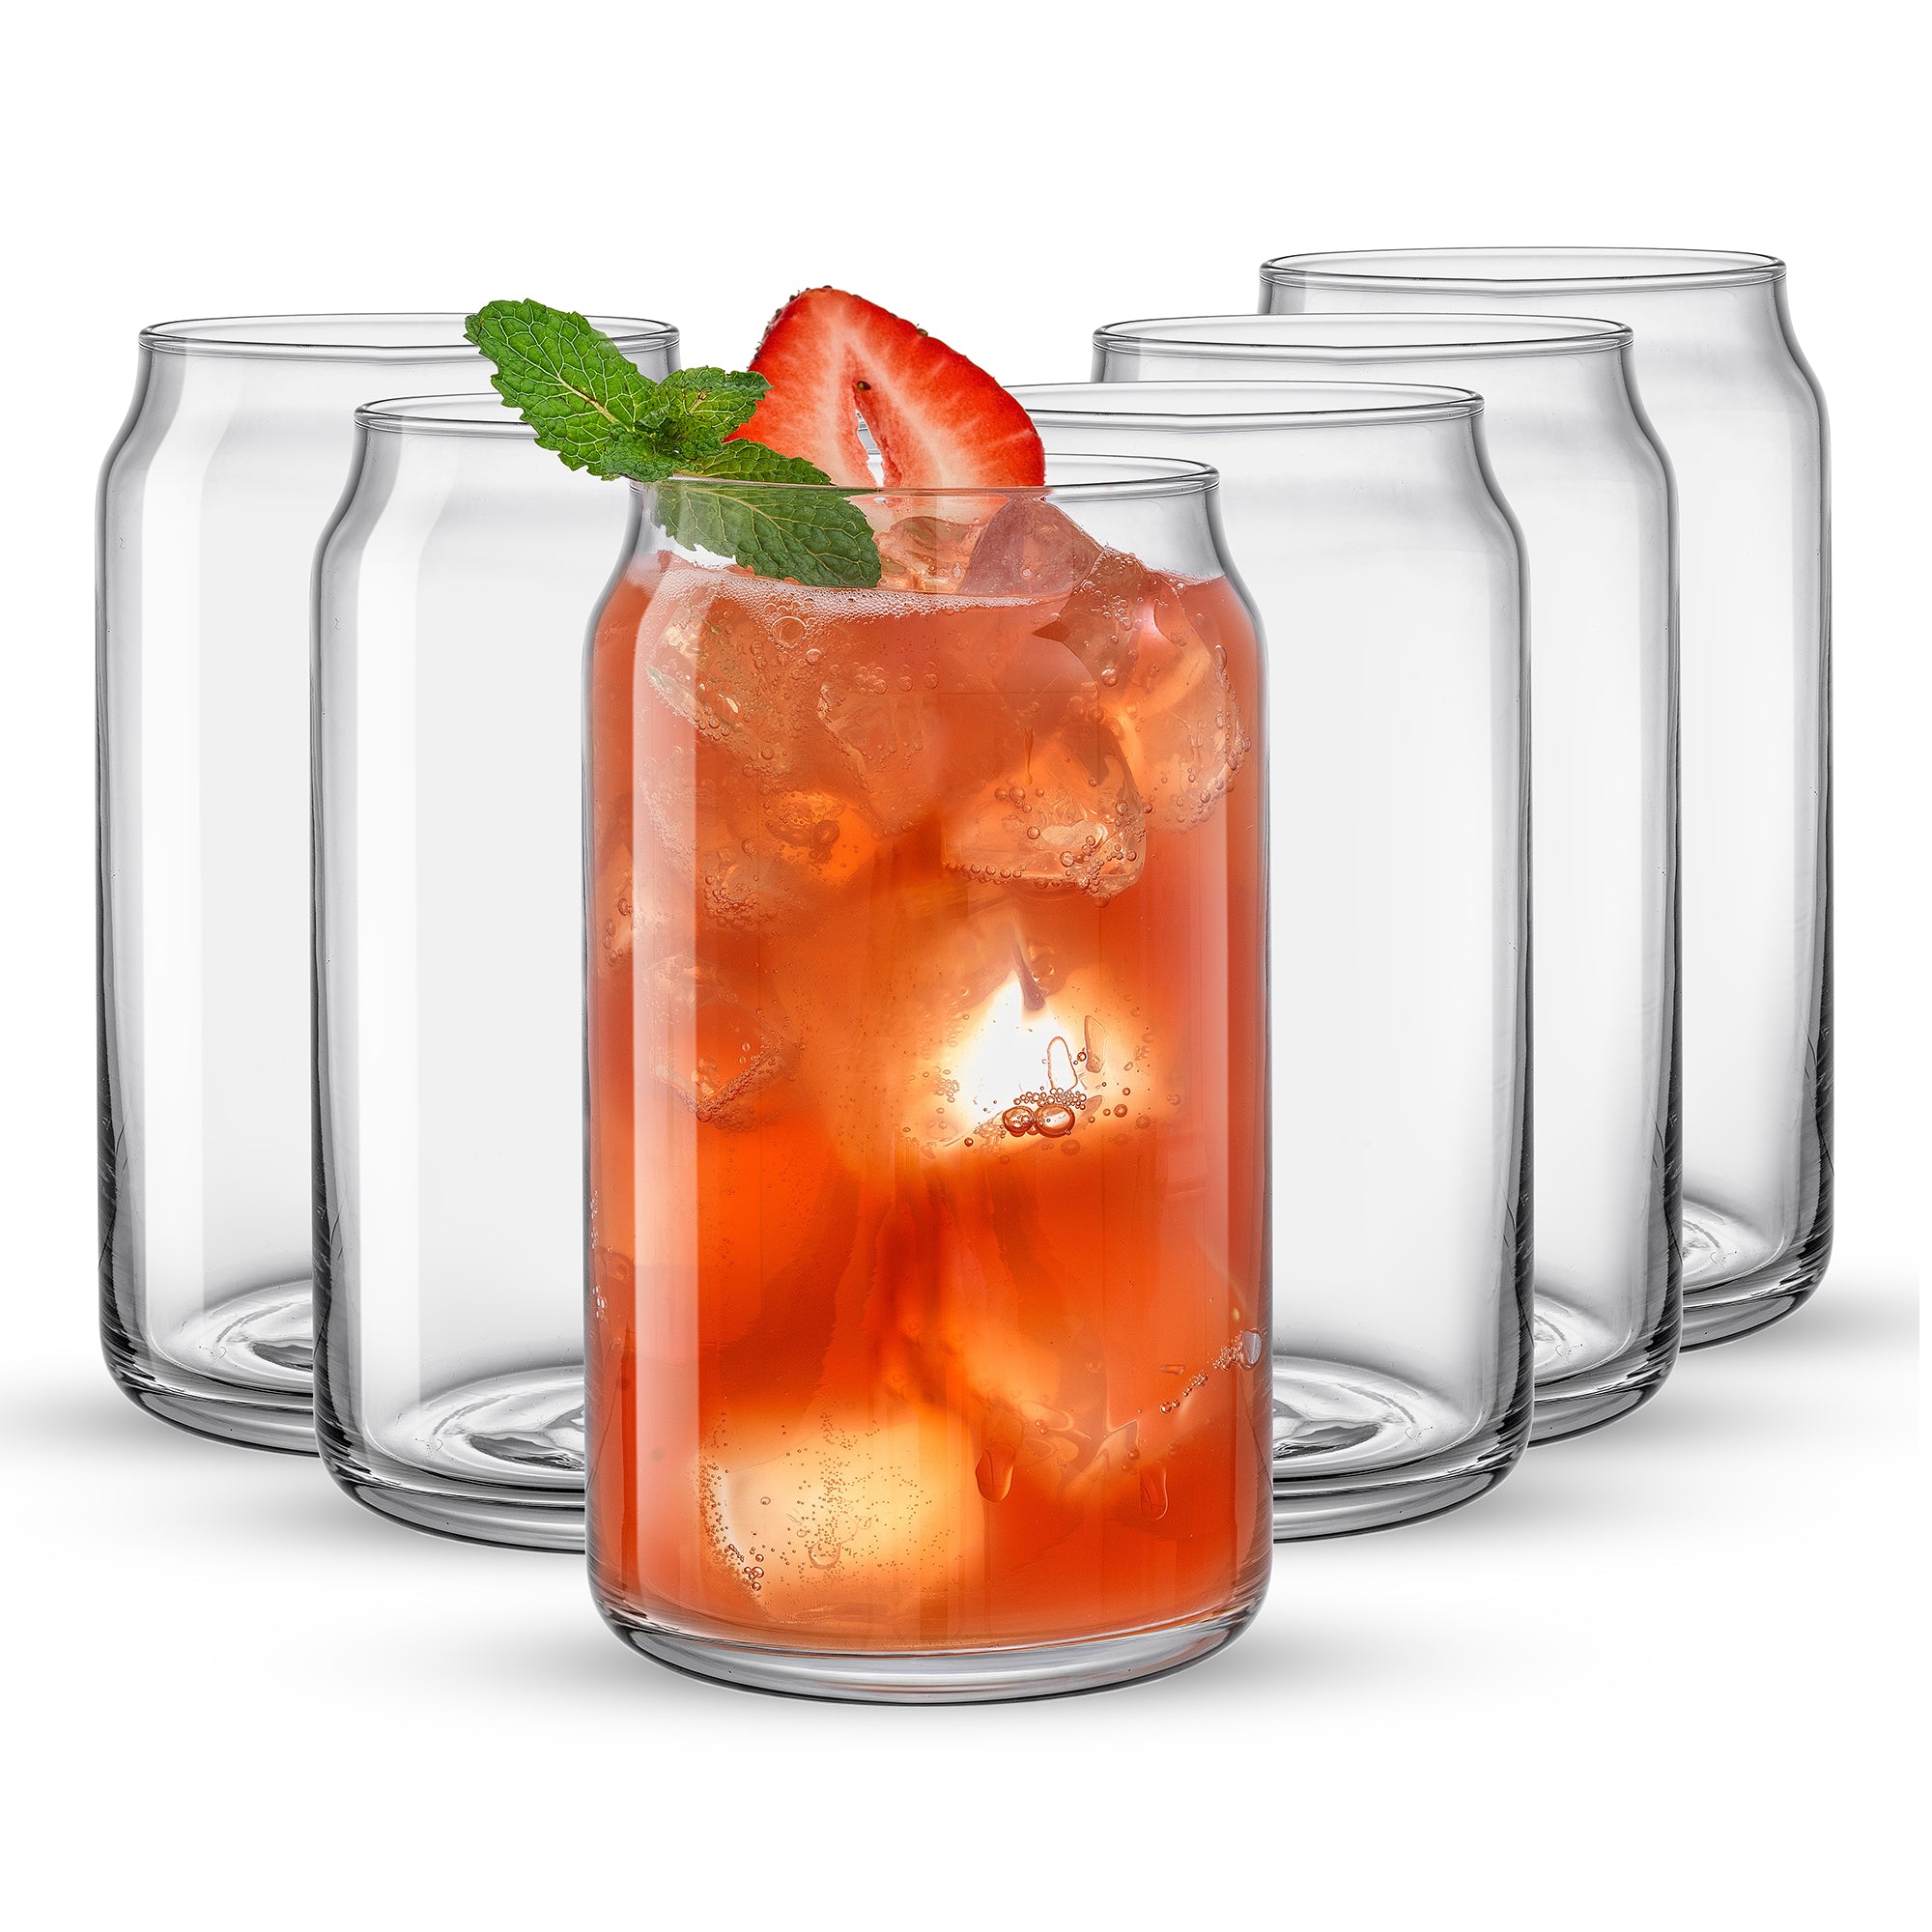 Five clear glass cups and one glass cup filled with a red beverage, mint leaf, and strawberry shaped like classic beverage cans sit in a row on a white background. These are JoyJolt Classic Can Shape Tumbler Drinking Glass Cups.